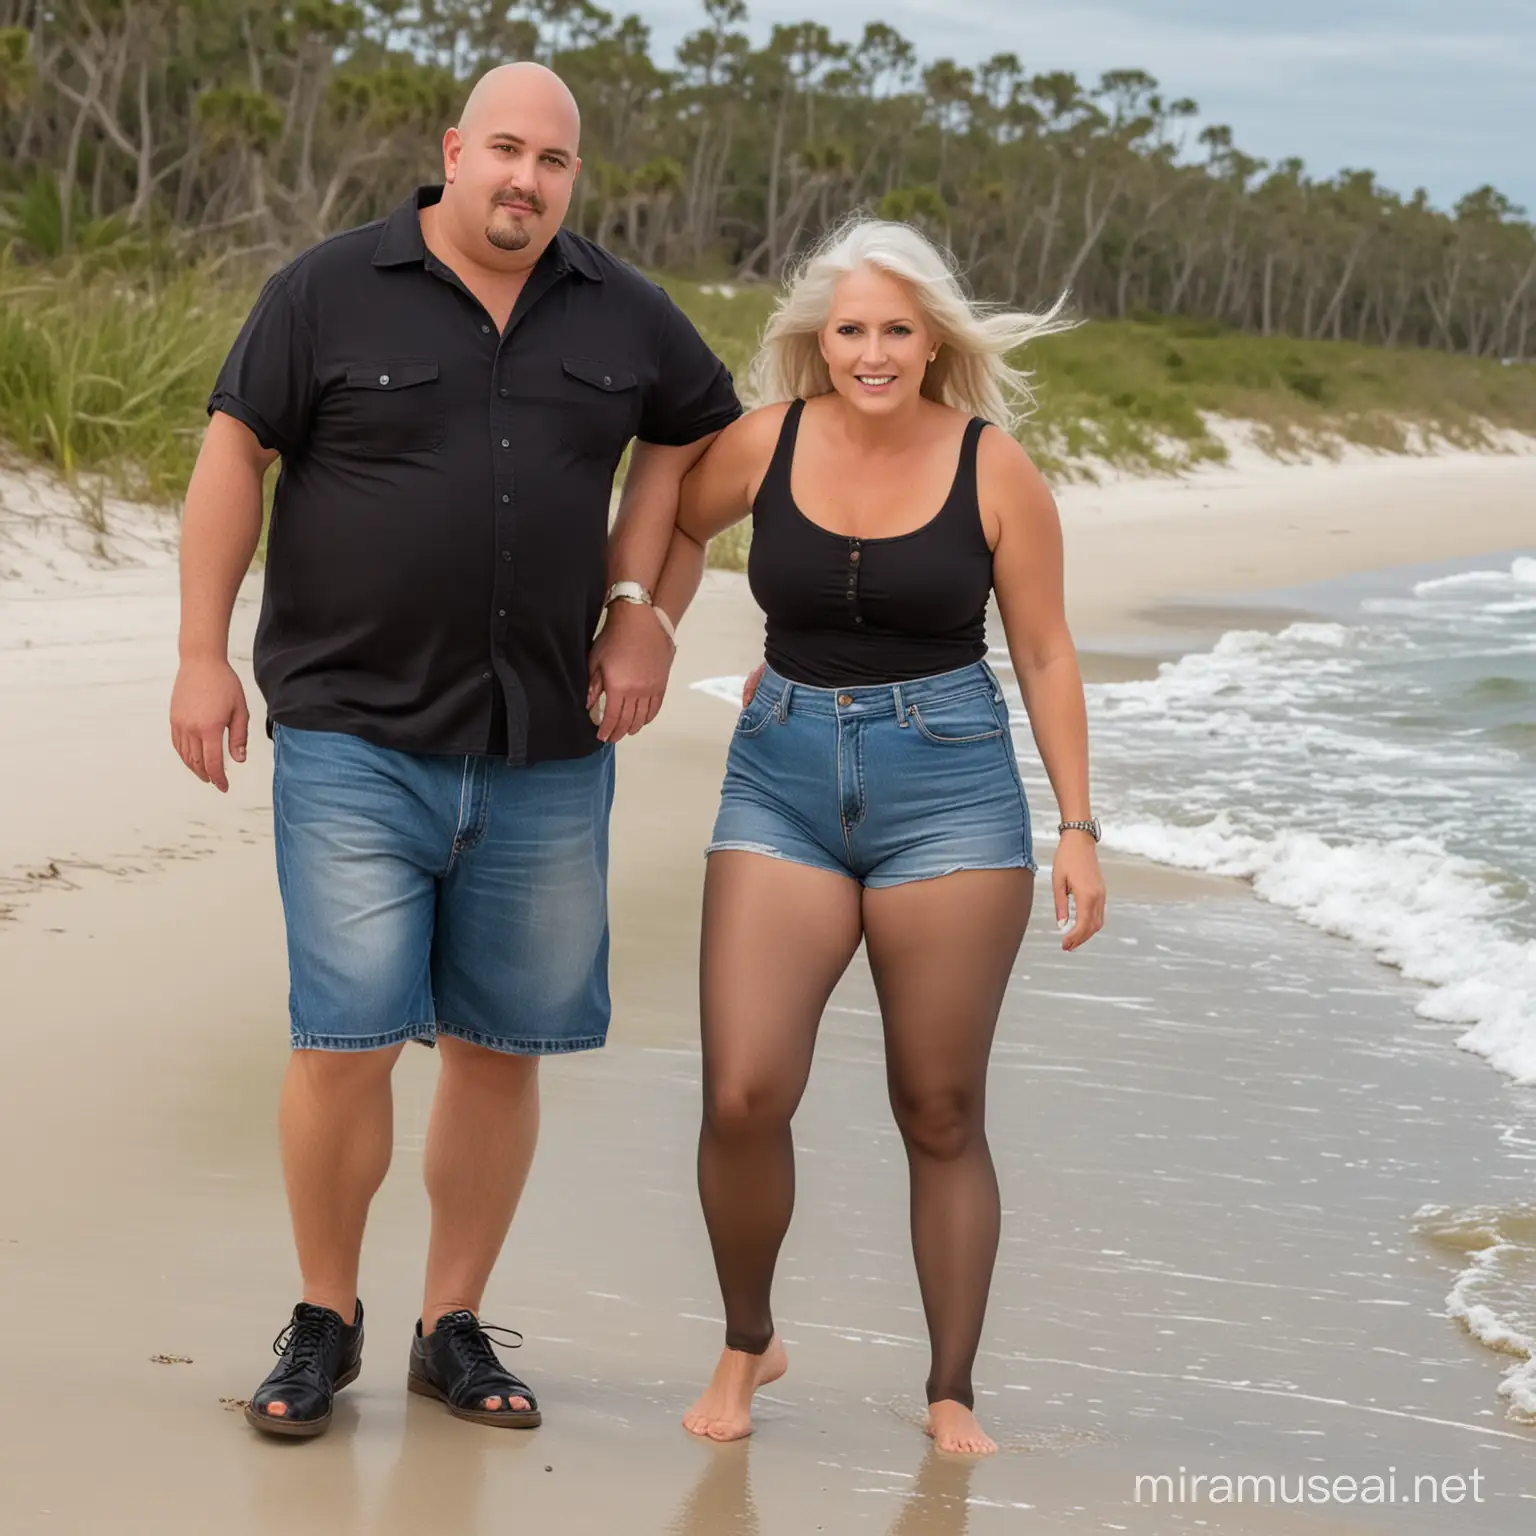 husband and wife on Florida sandy beach, fat chubby husband bald, 35 years old, short, fat, bald, goatee, wearing jeans shorts and black button down shirts, wife 65 years old, shiny brown pantyhose nylon tights, fit, silver hair, shiny brown pantyhose nylon tights, denim blue jean shorts, grey tank top

